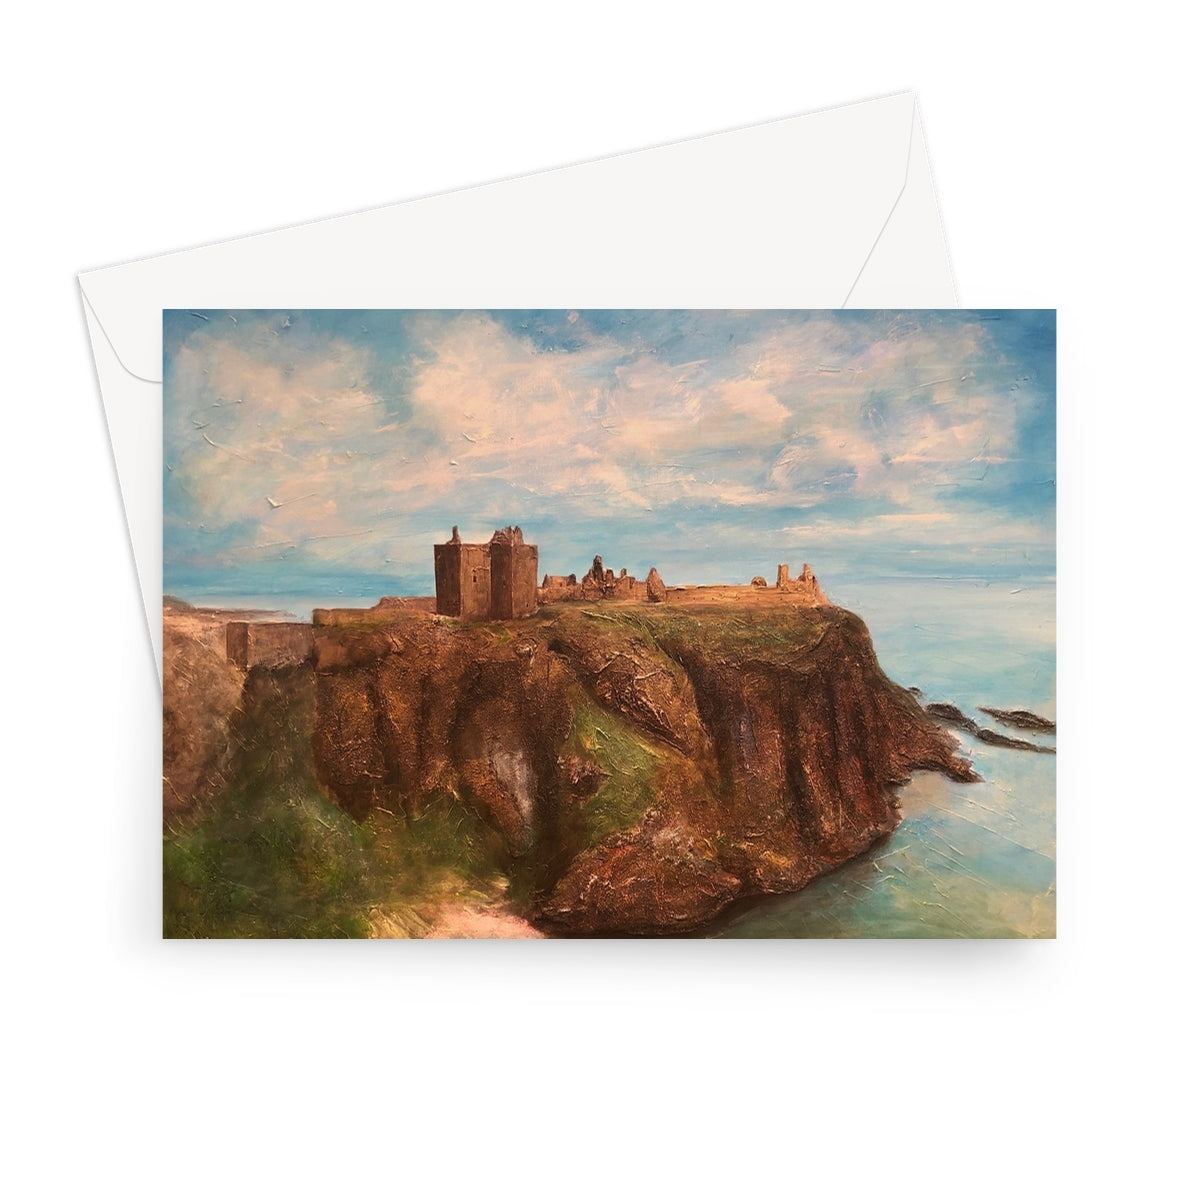 Dunnottar Castle Art Gifts Greeting Card-Stationery-Prodigi-7"x5"-1 Card-Paintings, Prints, Homeware, Art Gifts From Scotland By Scottish Artist Kevin Hunter